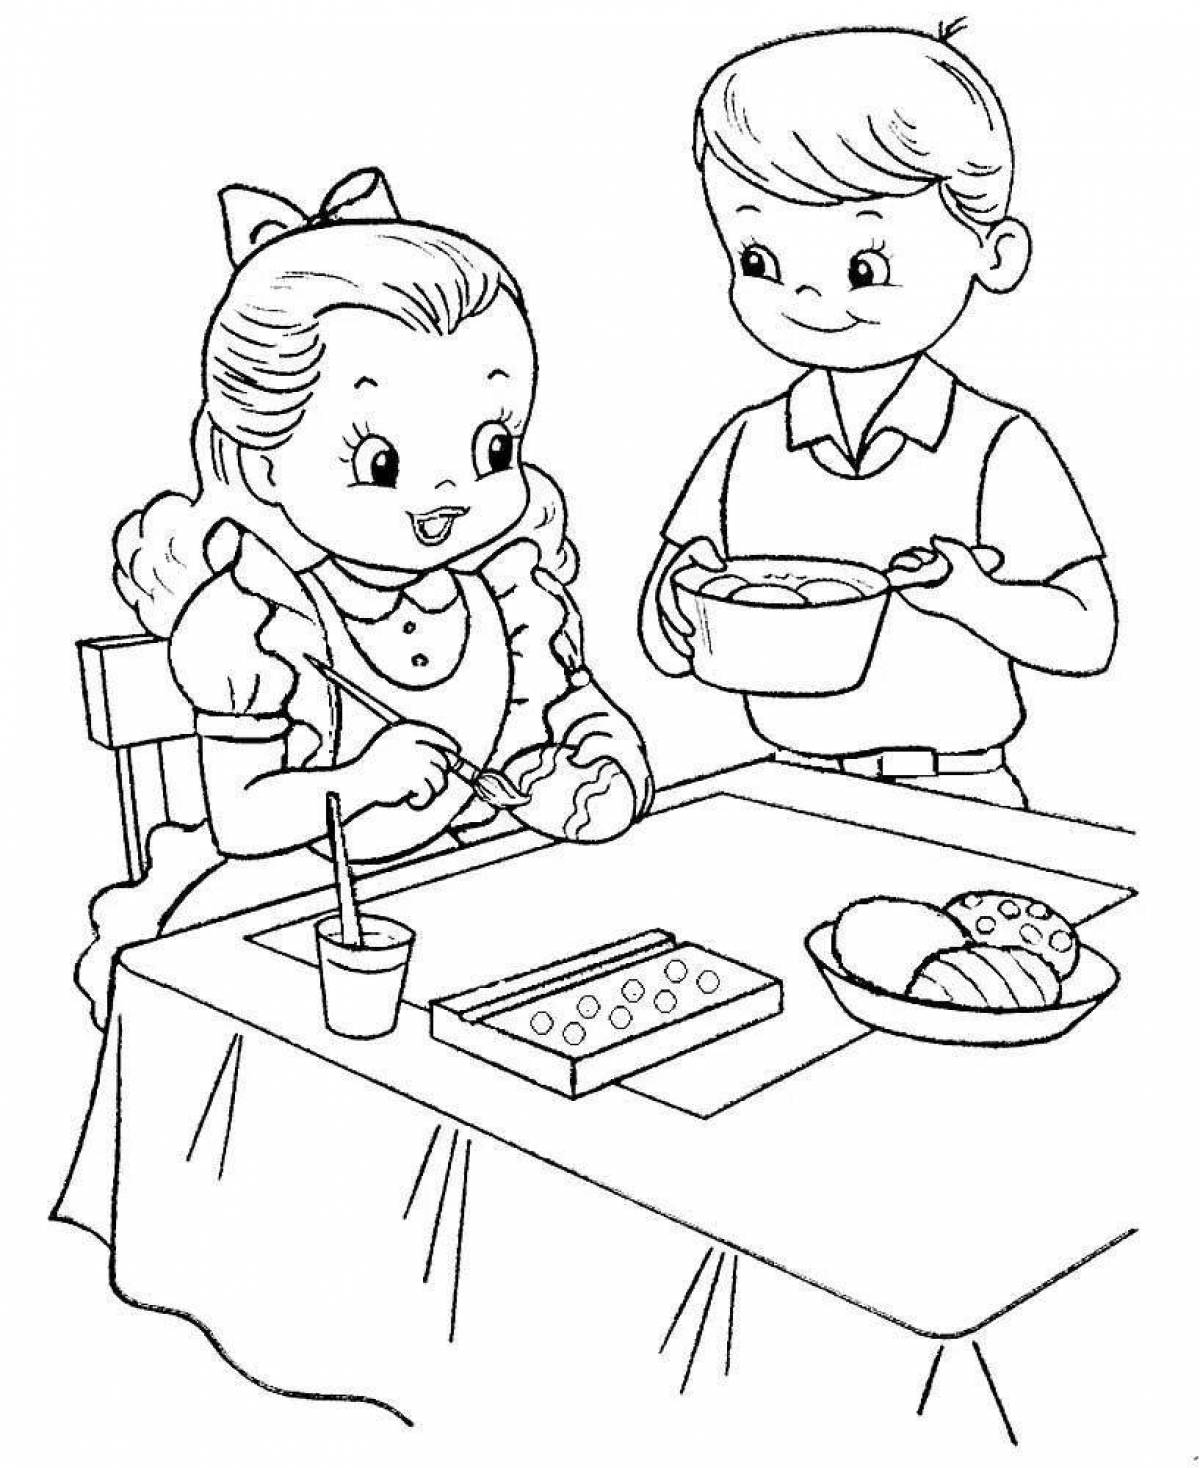 A fascinating coloring book for children rules of conduct in kindergarten